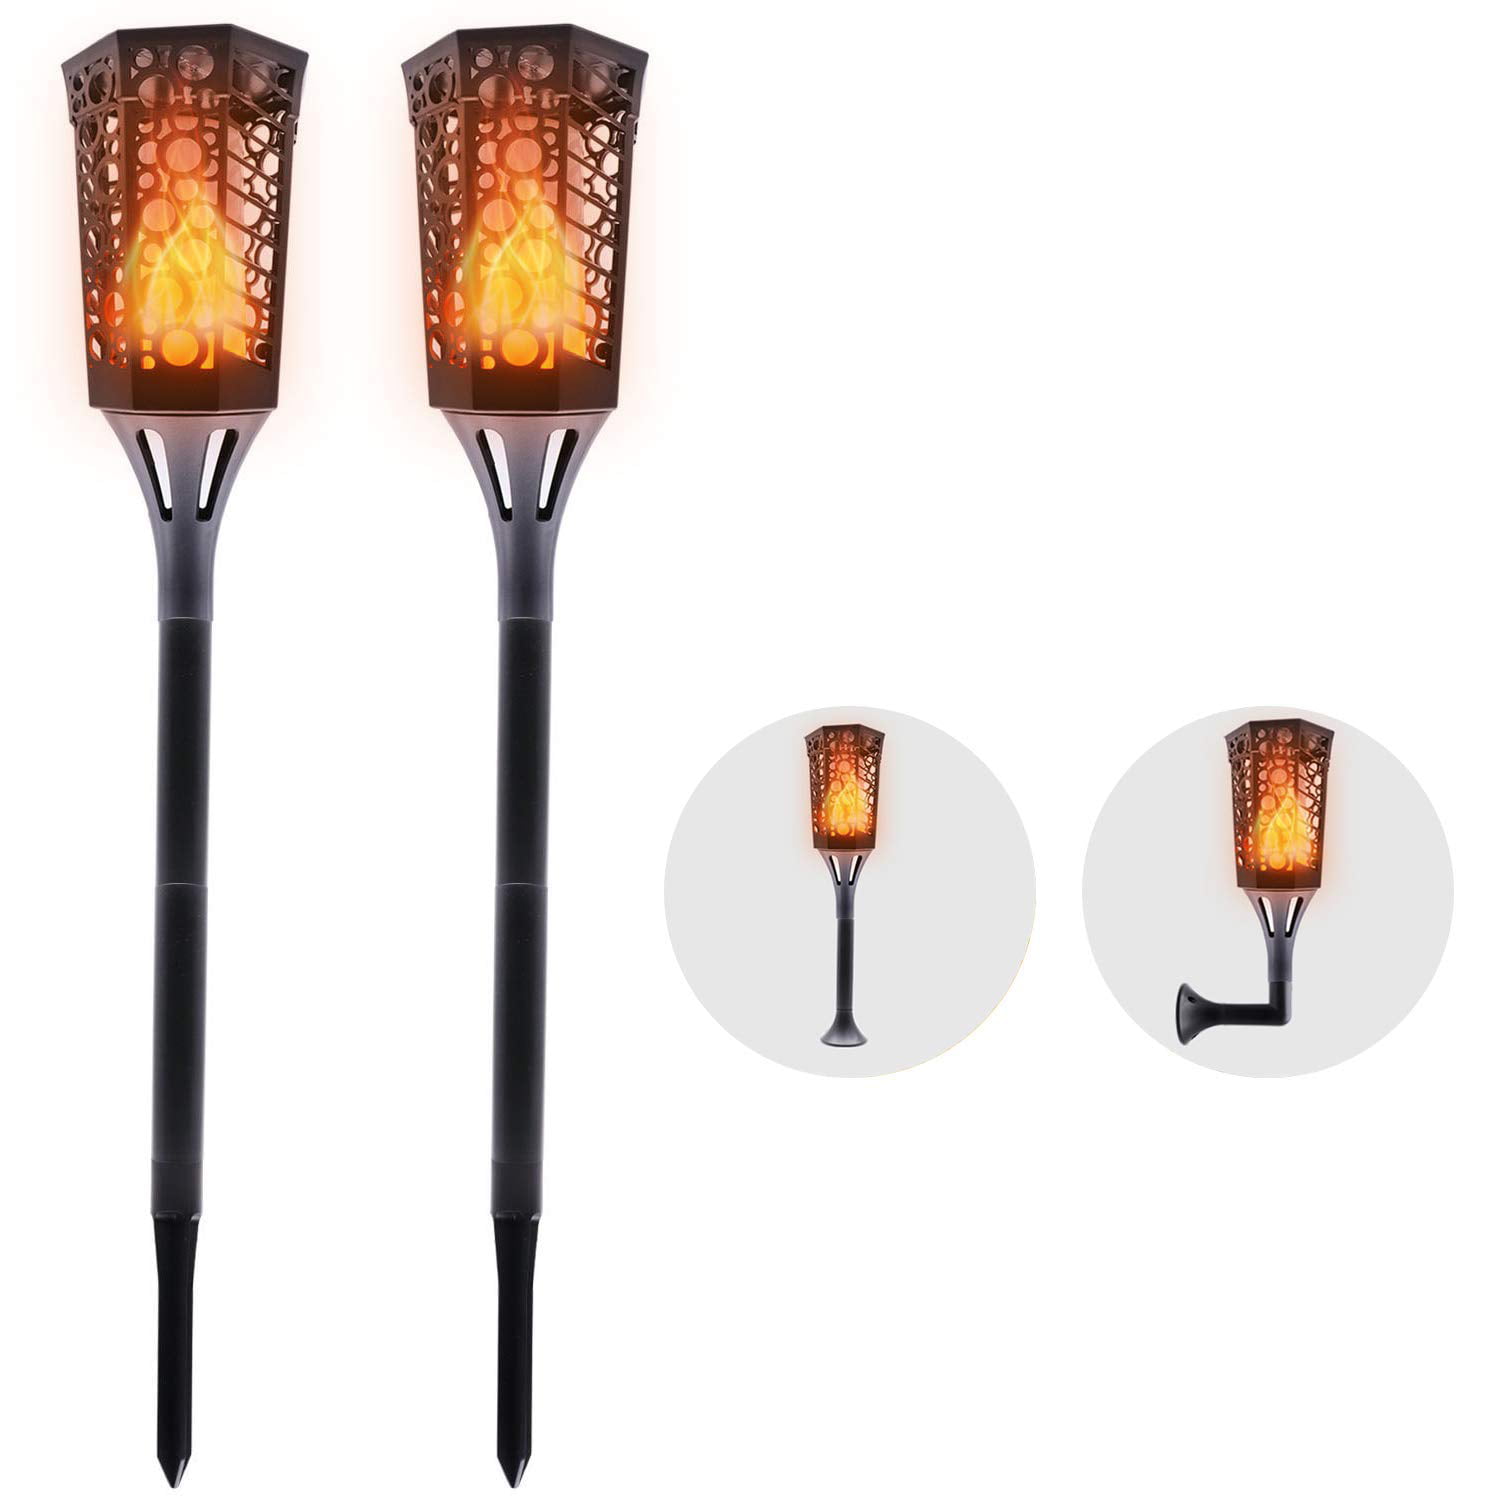 10x Outdoor LED Solar Torch Flame Dancing Light Garden Flickering Path Lawn Lamp